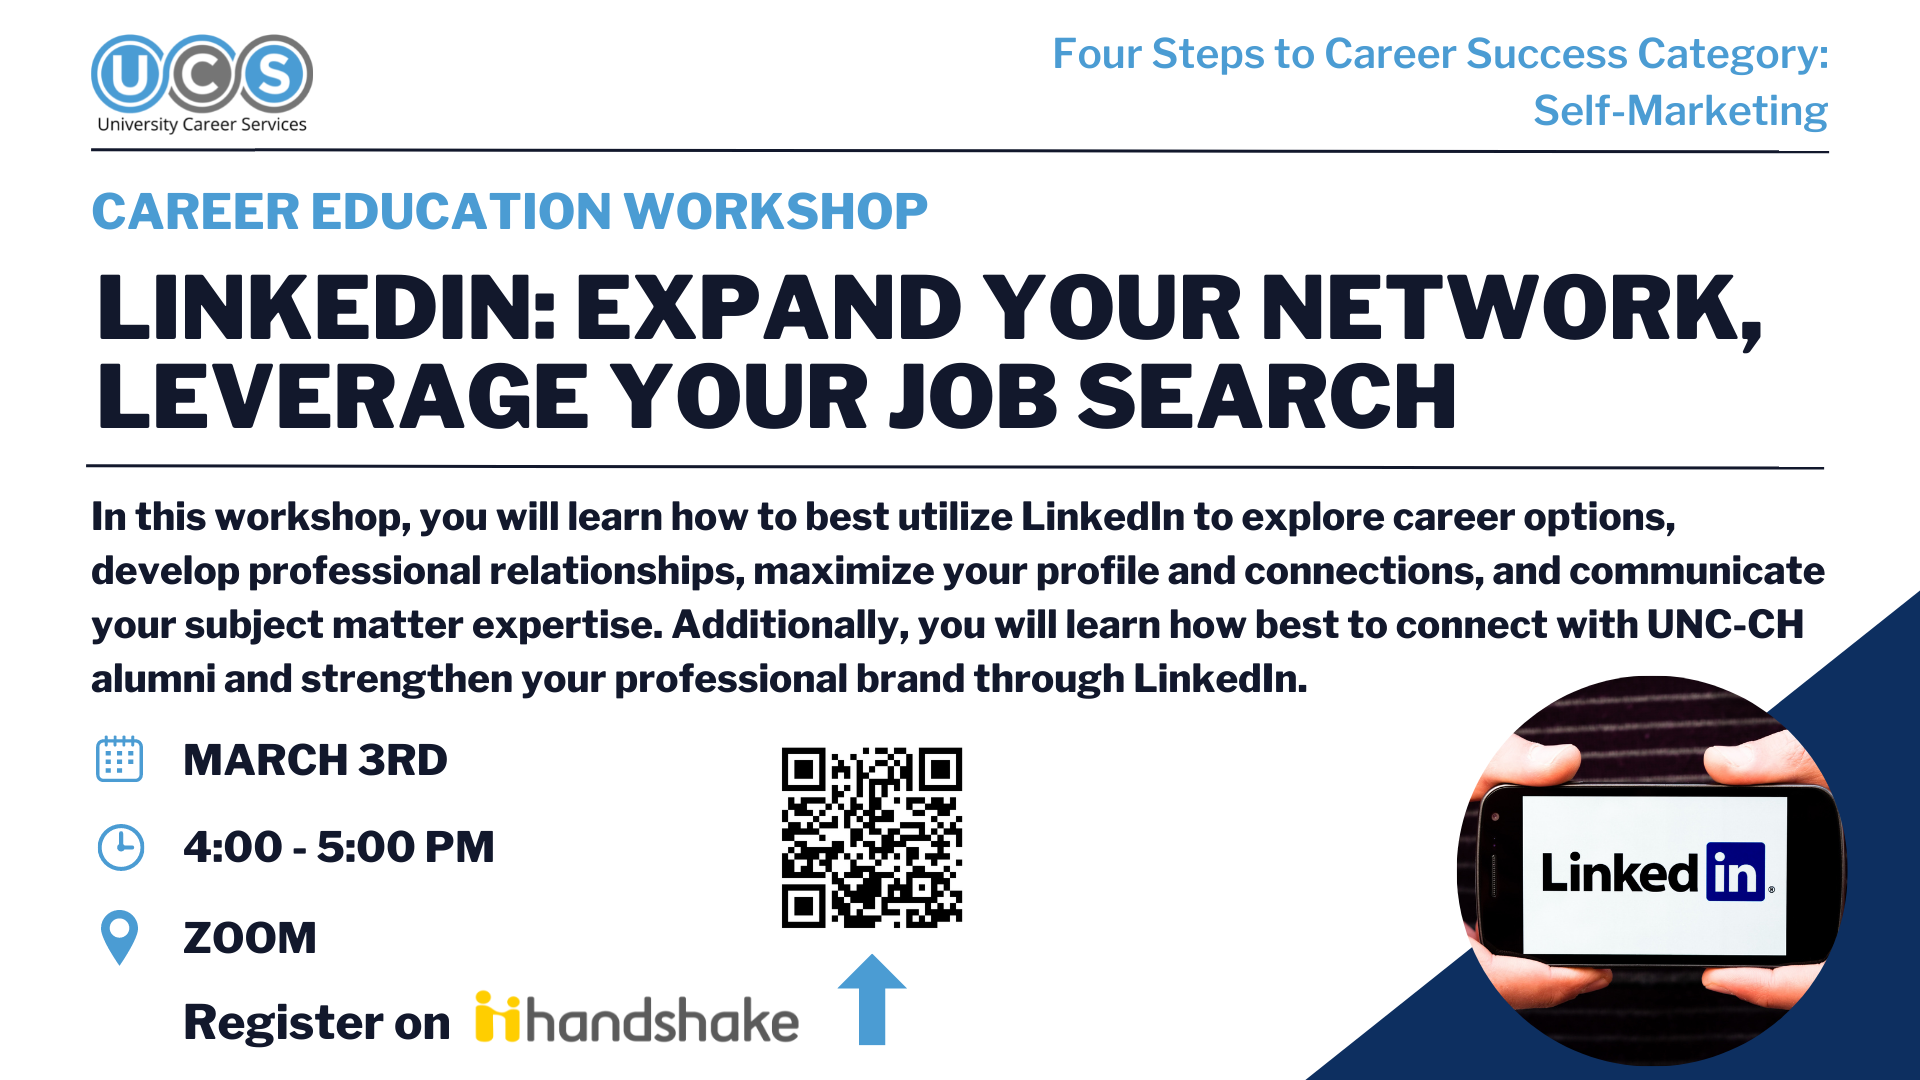 In this workshop, you will learn how to best utilize LinkedIn to explore career options, develop professional relationships, maximize your profile and connections, and communicate your subject matter expertise. Additionally, you will learn how best to con